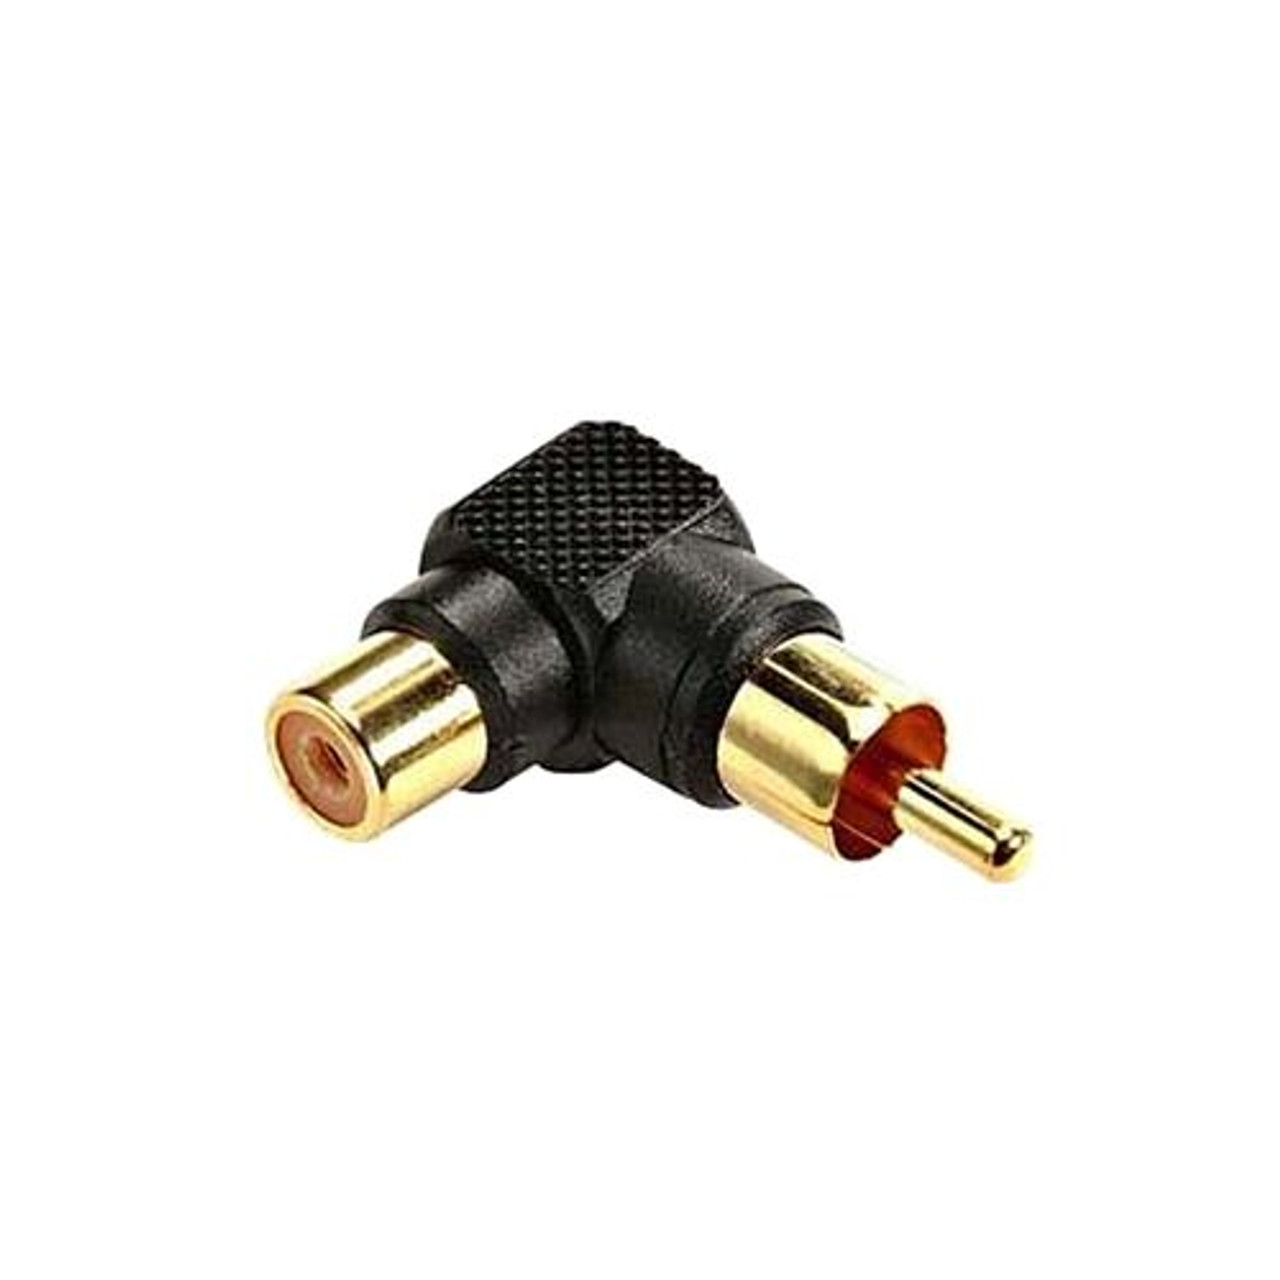 Steren 251-111-10 RCA Right Angle Adapter Female to Male Gold Plate 90 Degree Single Plug Stereo Cable Connector Audio Video Tool Less Hook-Up Component Connector, Part # 251111-10